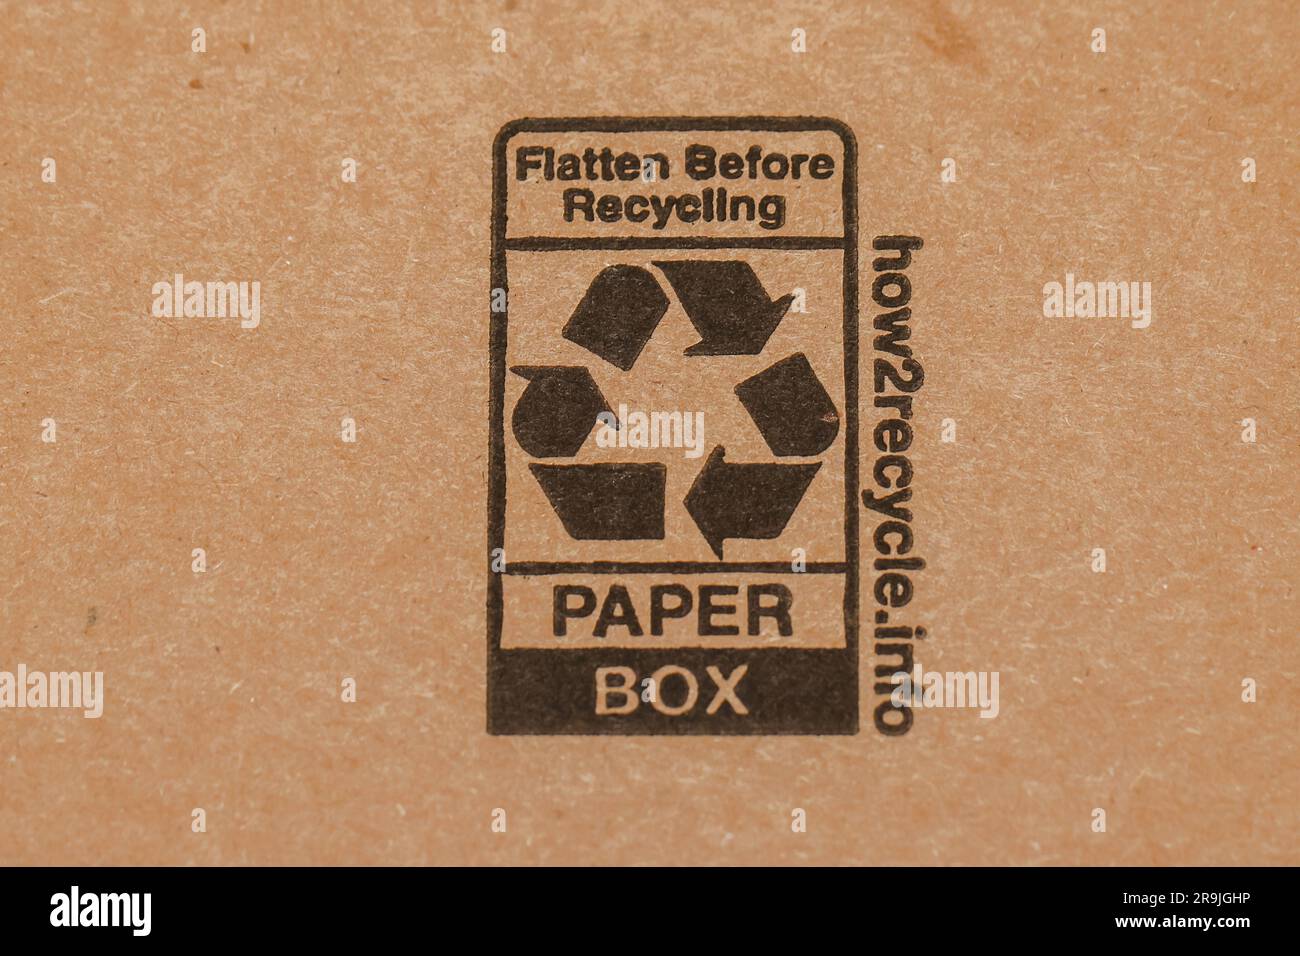 Recycle Logo on Carton Box. How to Recycle instructions printed on a Paper Box. Flatten Before Recycling information message. how 2 recycle recycling Stock Photo